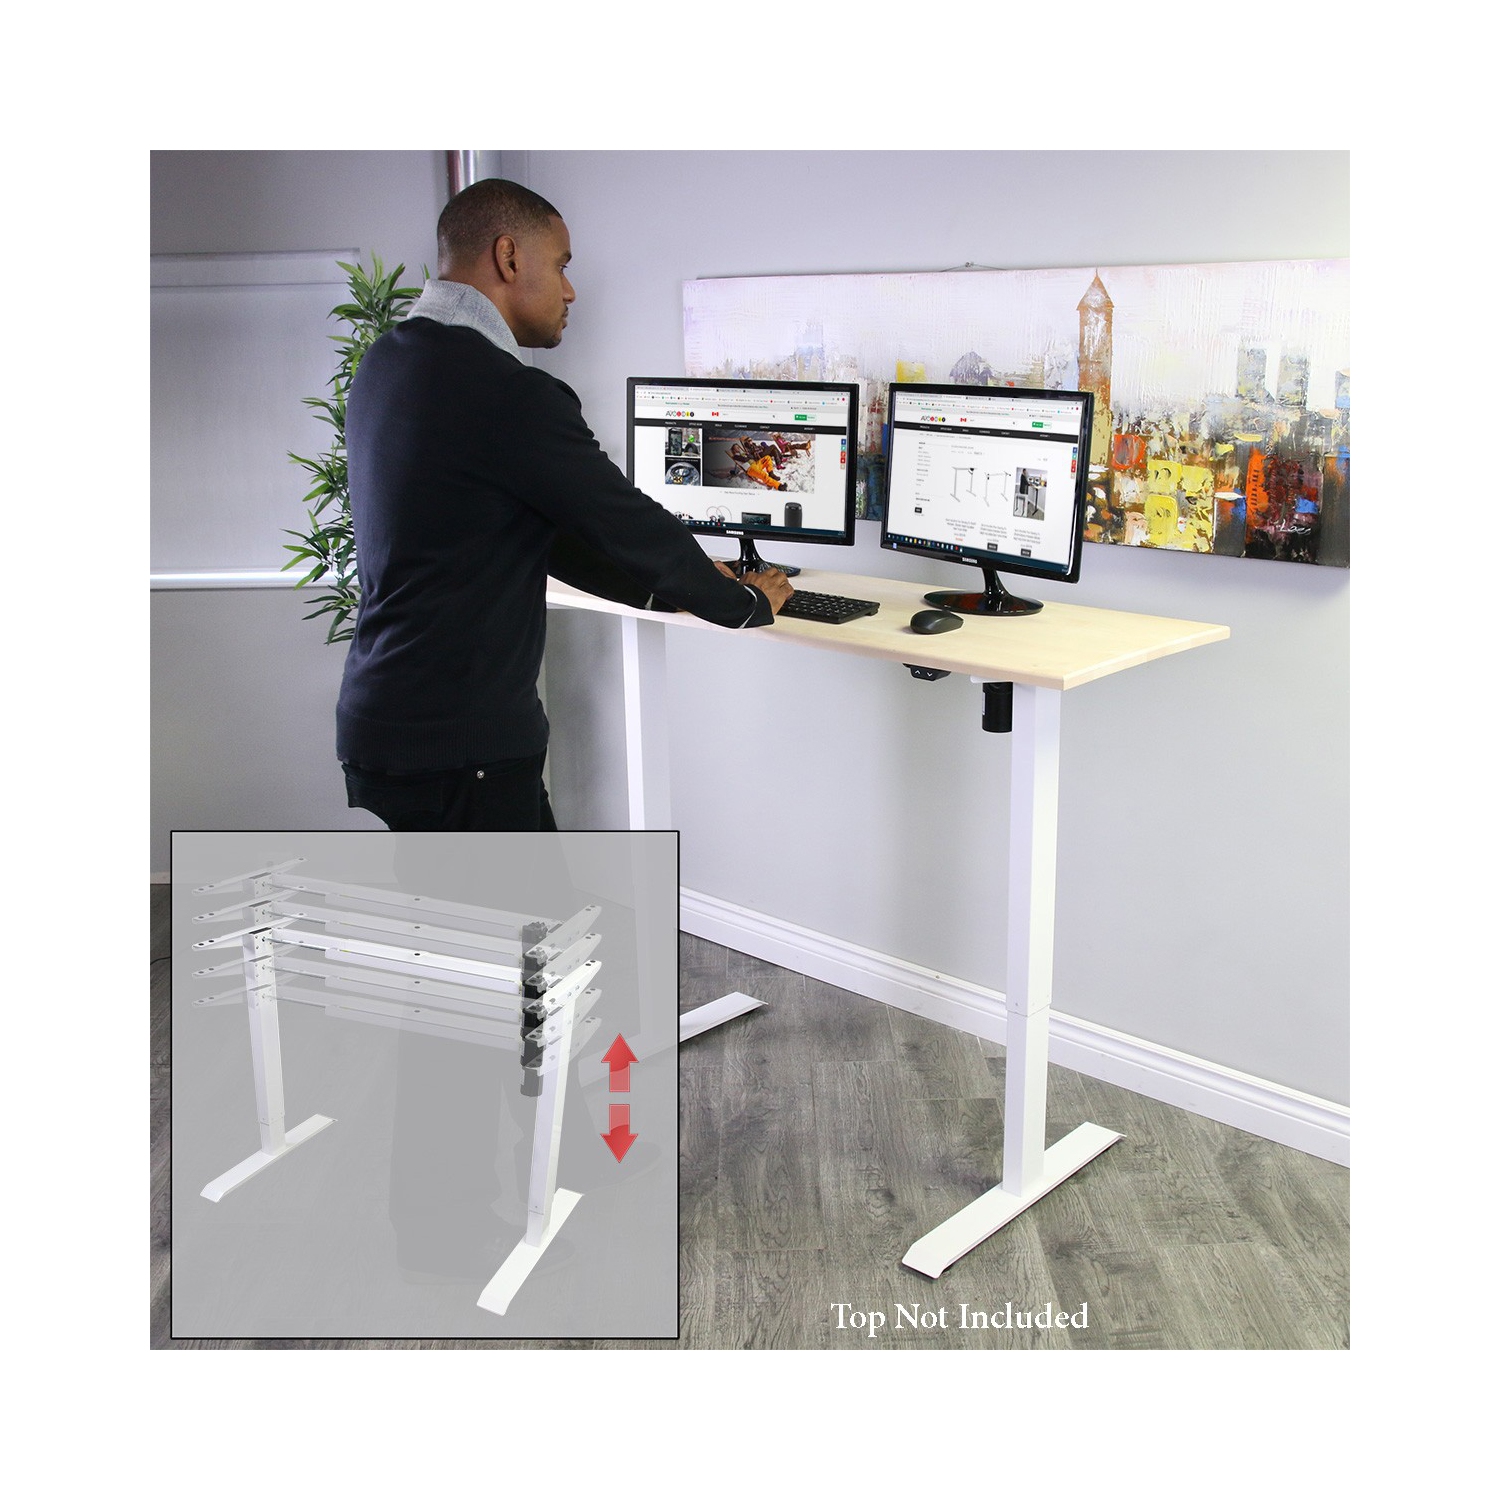 SMAGREHO Portable Adjustable Mini Office Foot Rest Stand Desk Foot